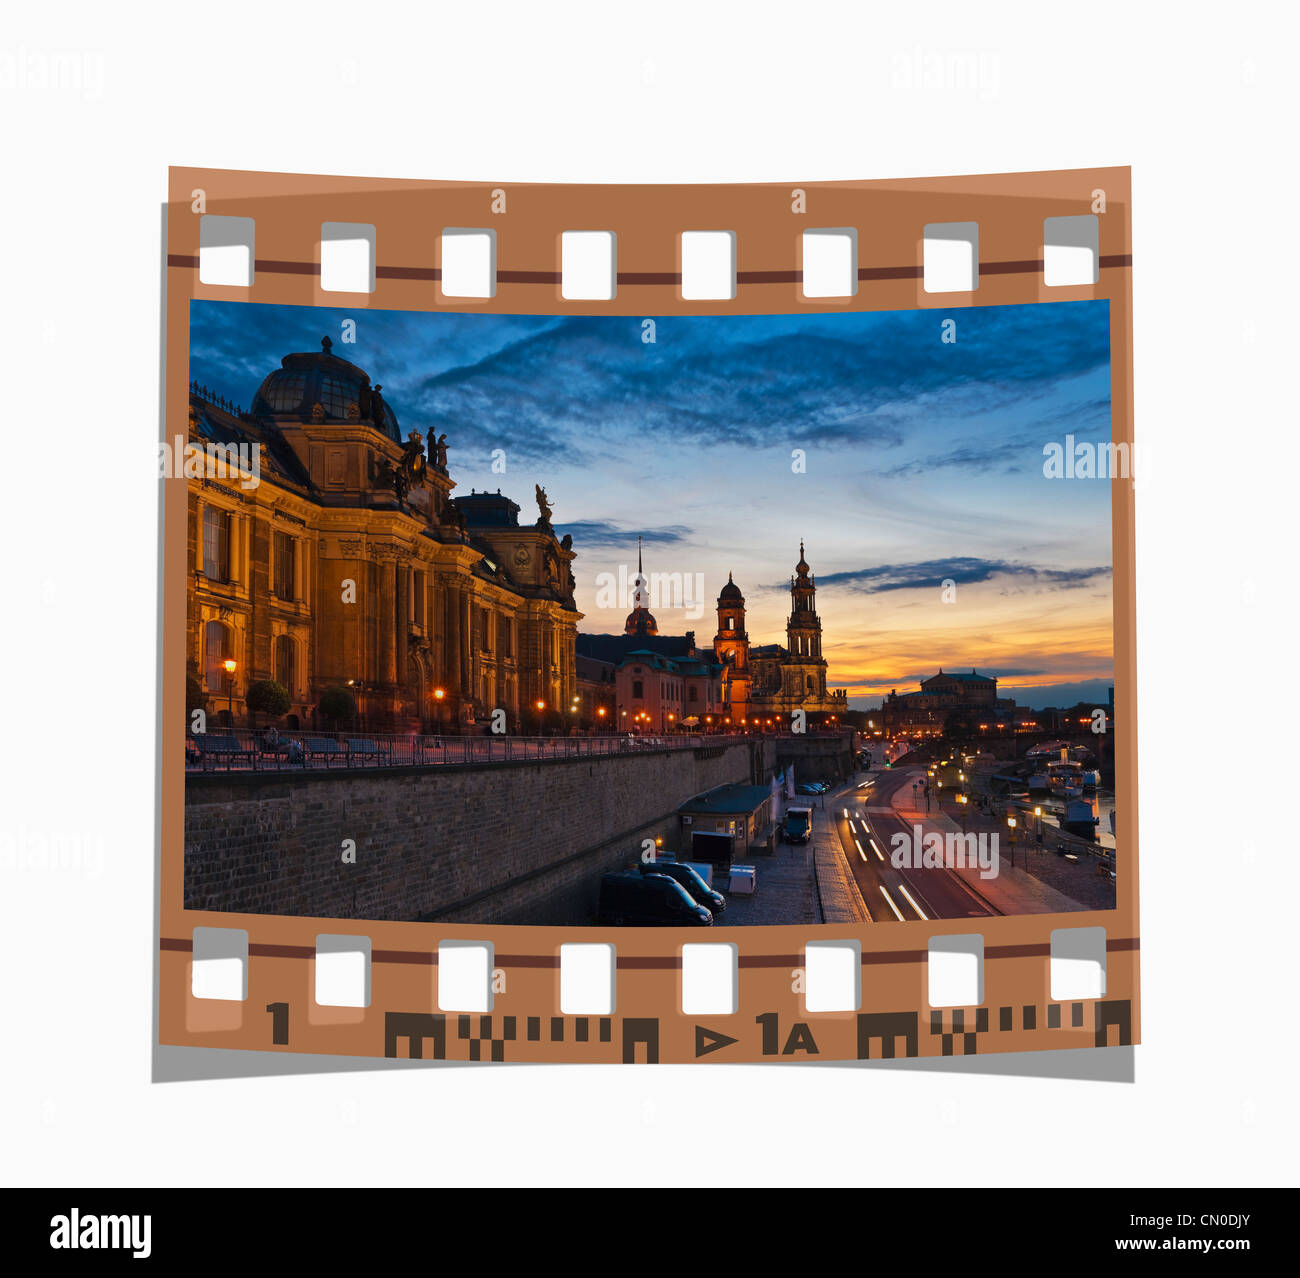 Filmstrip: academy of arts, the Staendehaus Building and Hofkirche Church, Dresden, Saxony, Germany, Europe Stock Photo